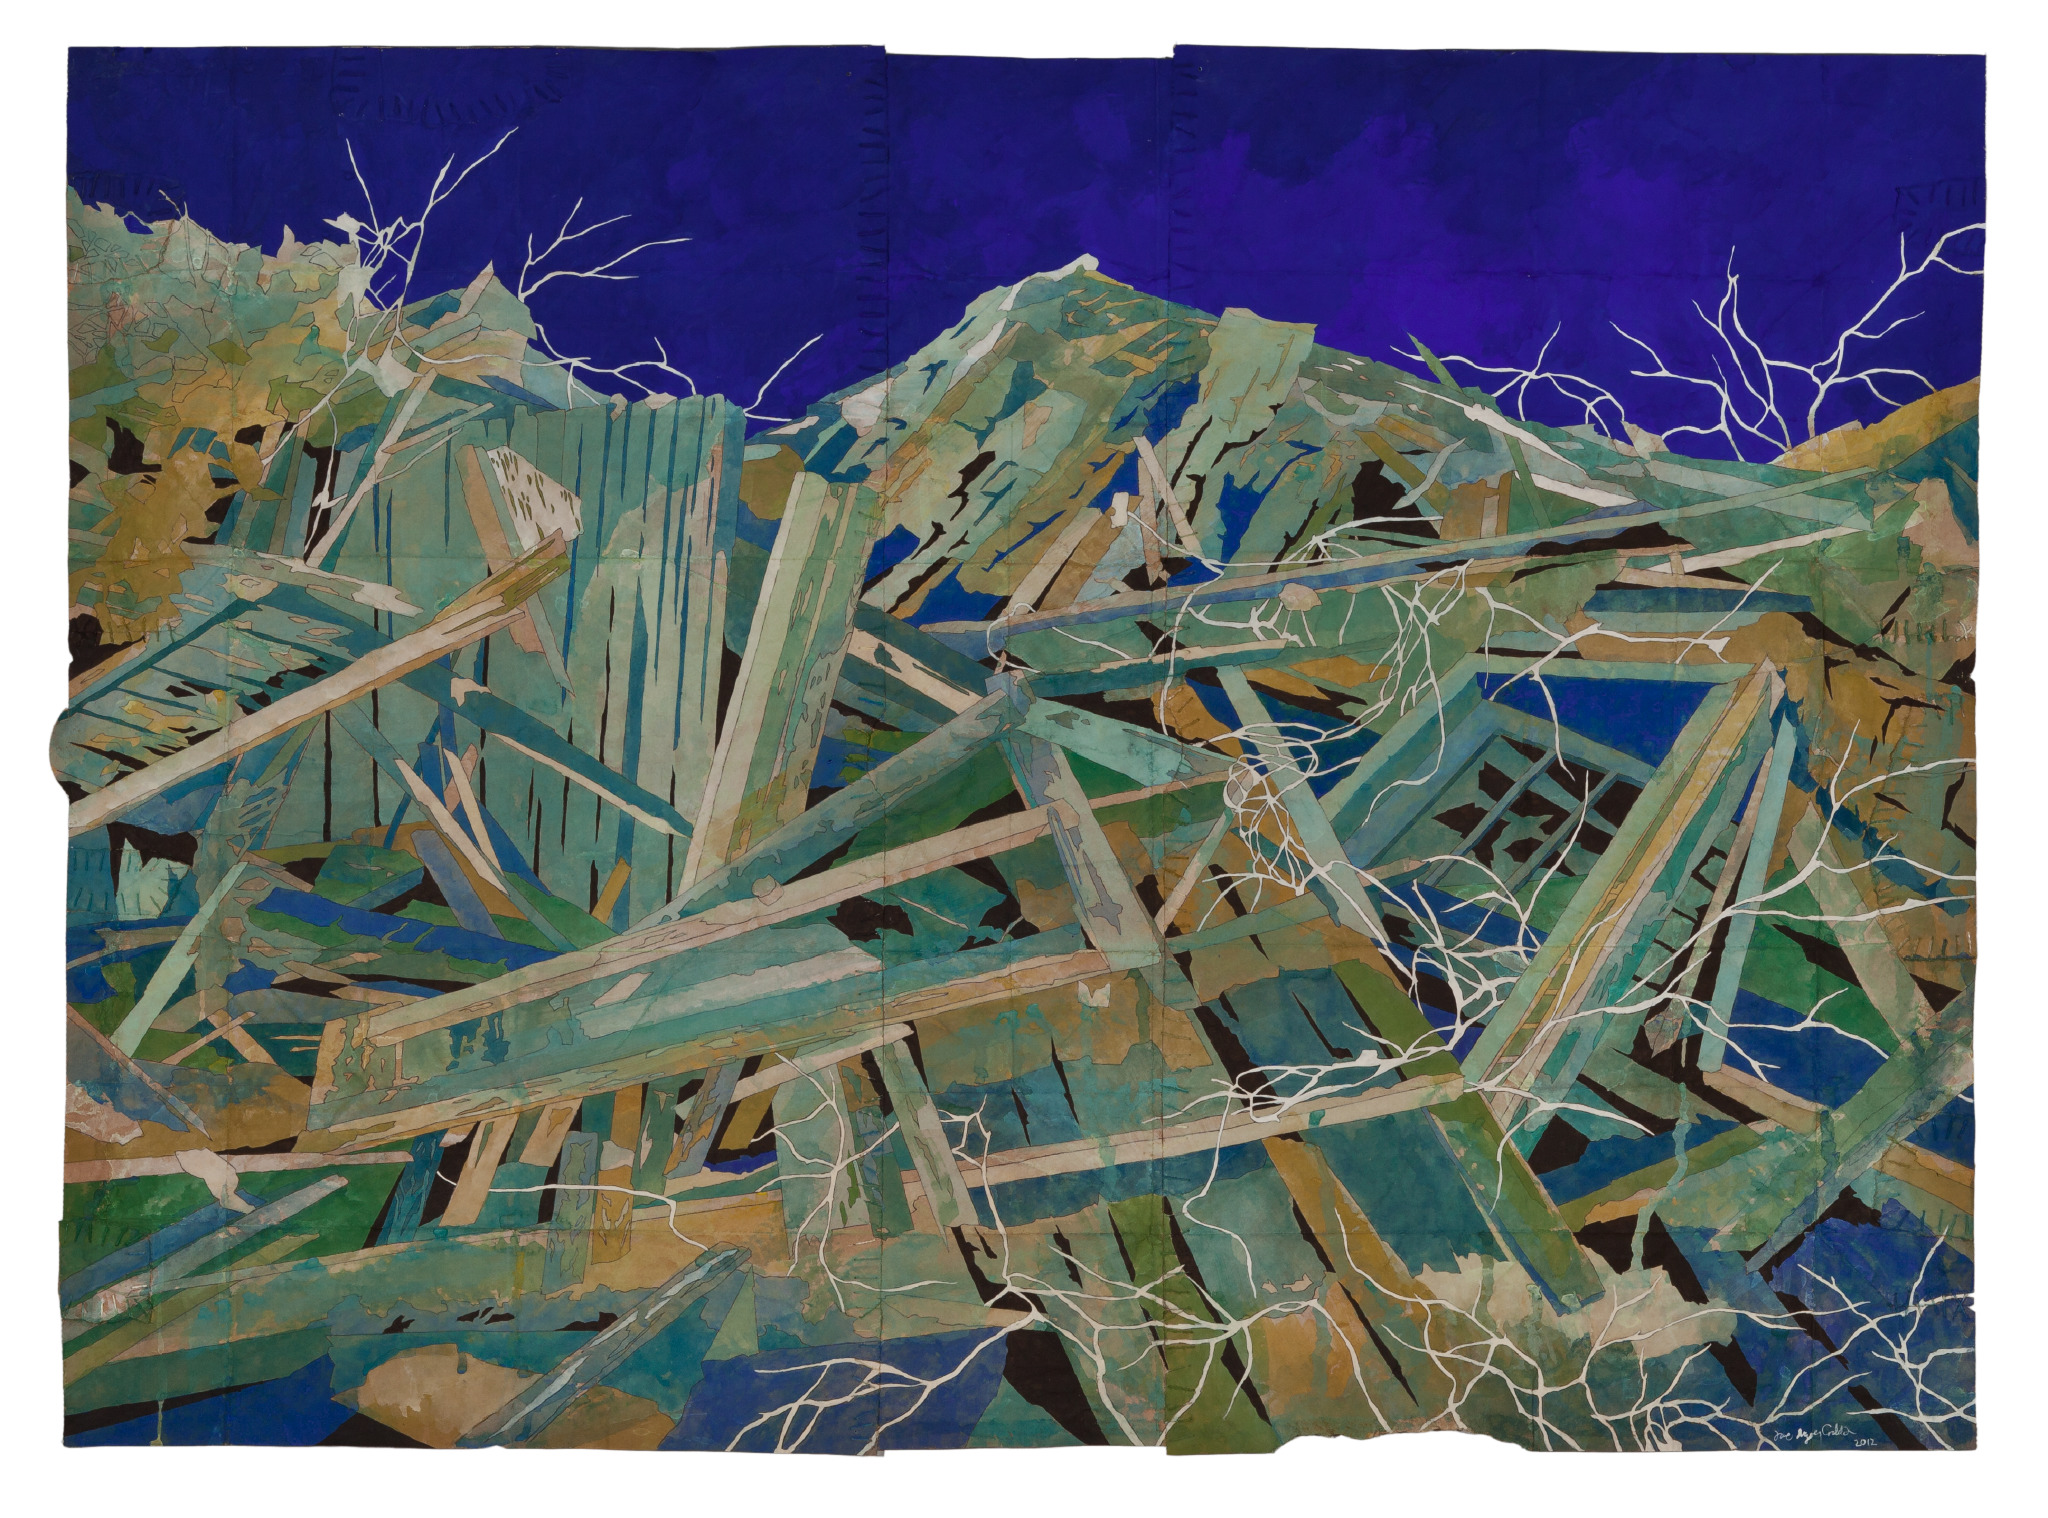 The work "An Ocean Slips Between Us" by Maysey Craddock depicts a dilapidated wooden structure against a blue background. 